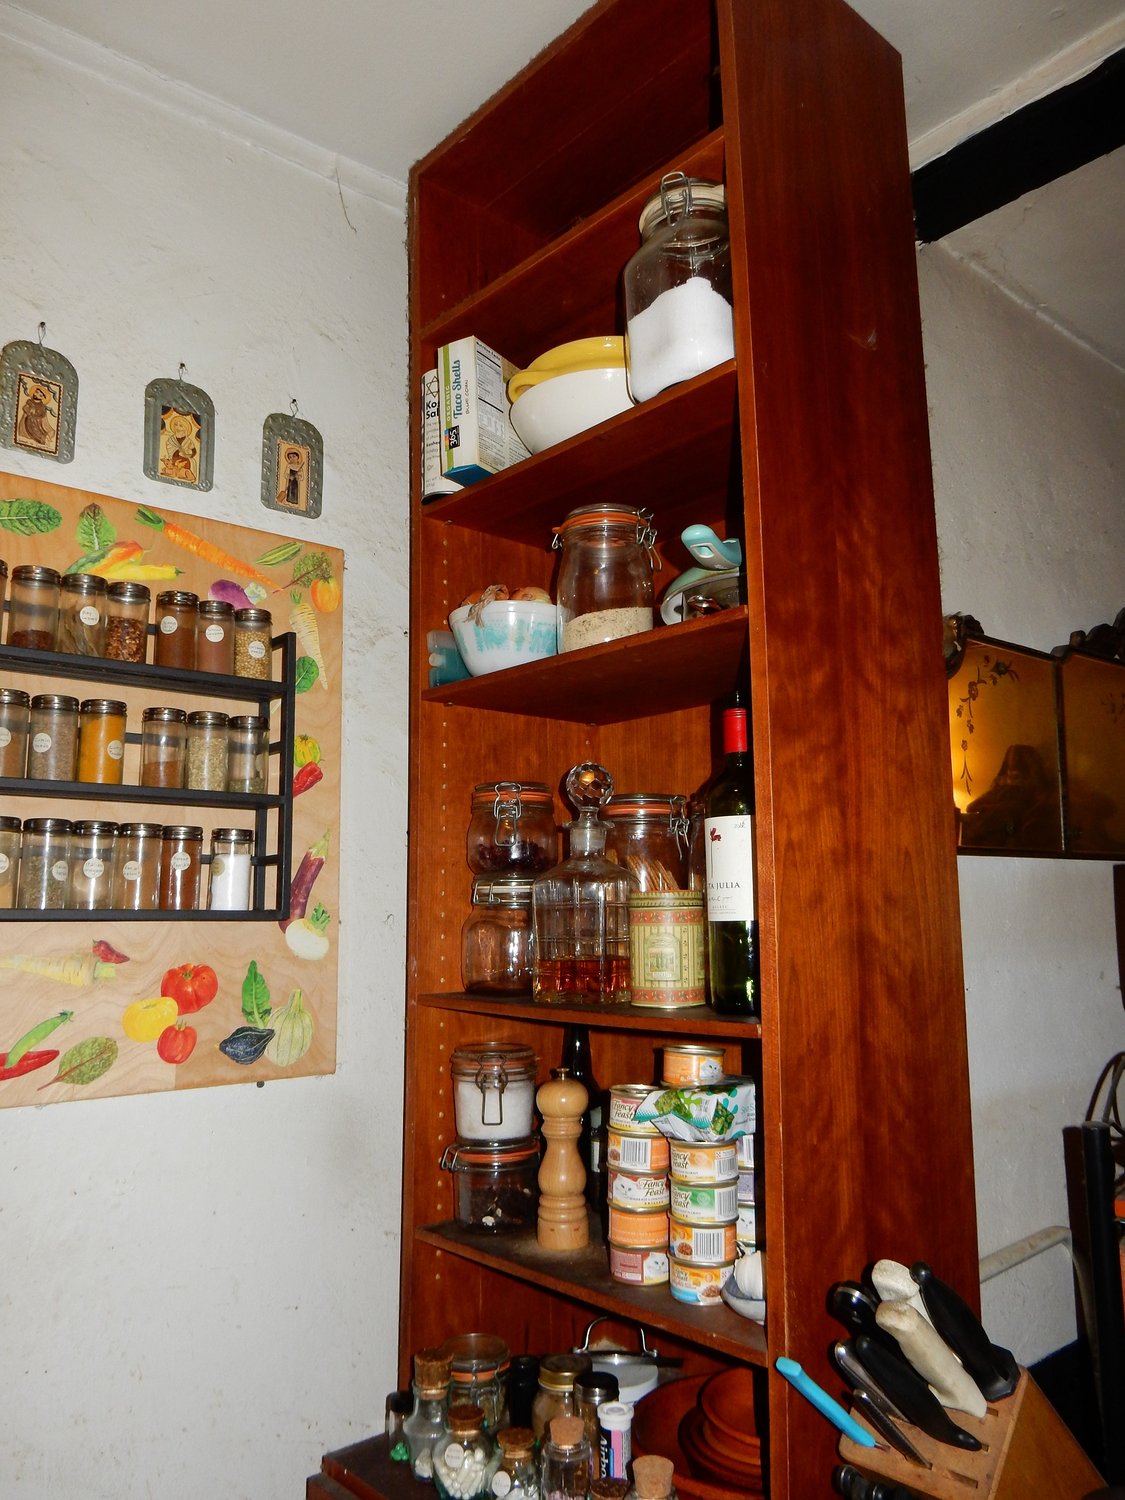 Kitchen shelving and spice rack, New York City.